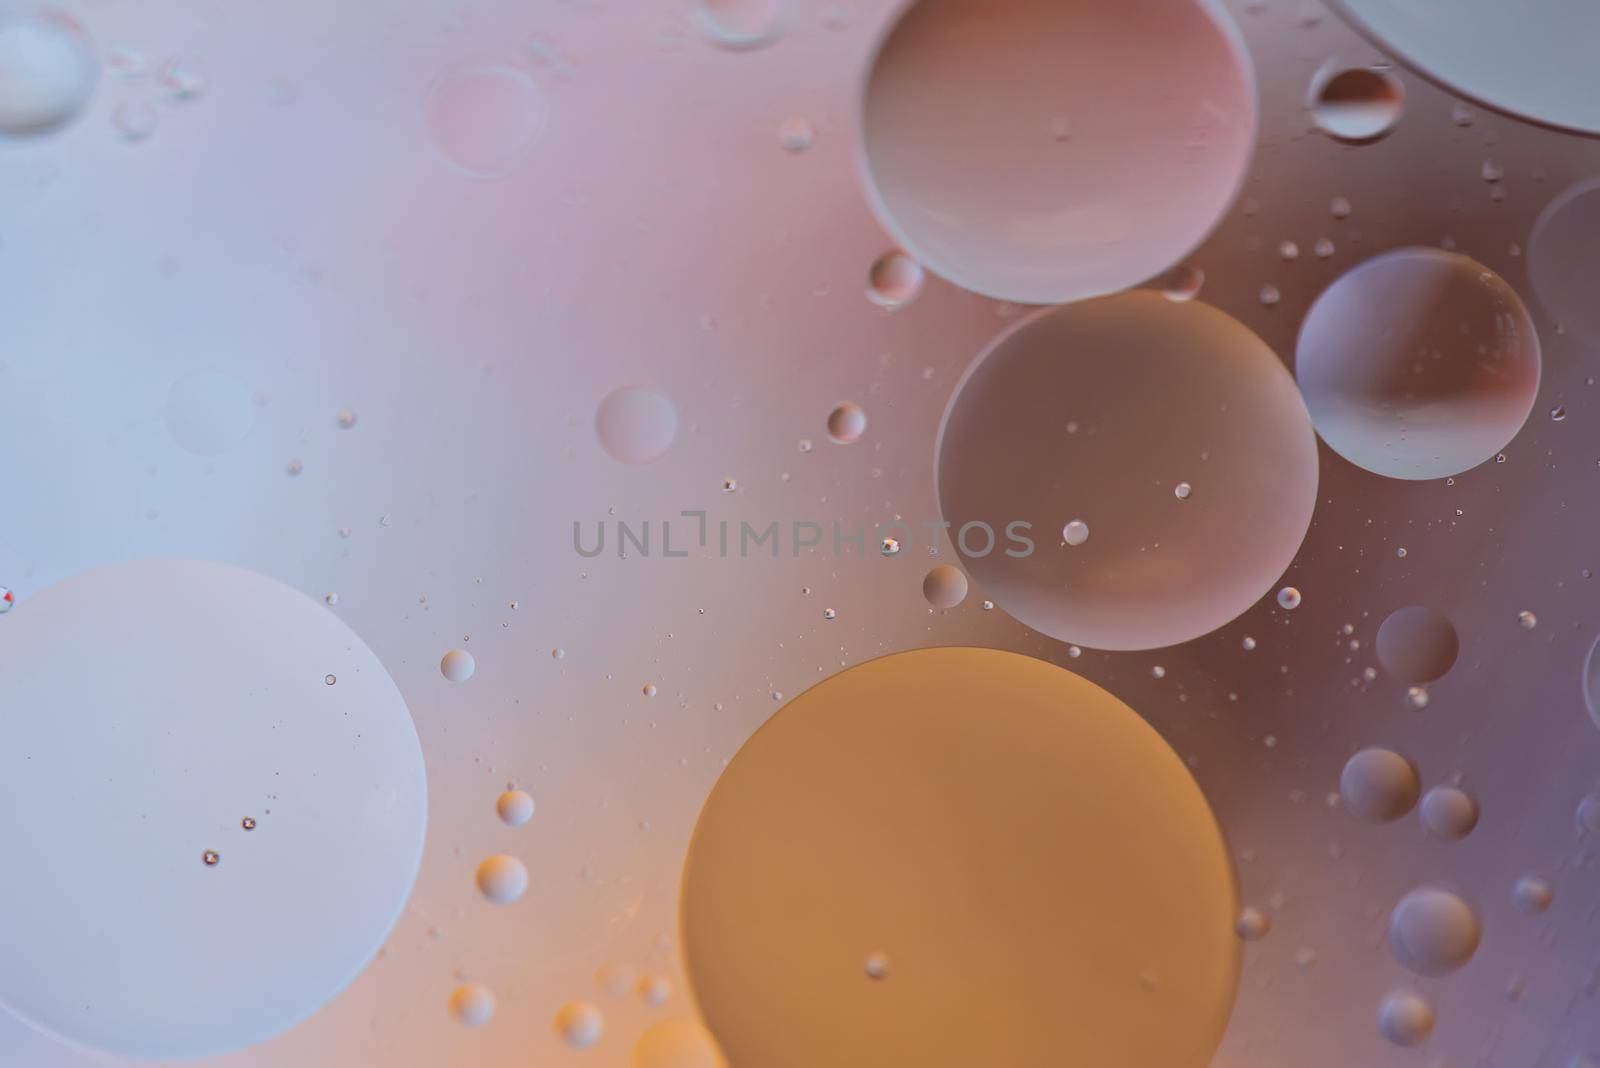 Oil drops in water. Defocused abstract psychedelic pattern image orange and gray colored. Abstract background with colorful gradient colors. DOF.